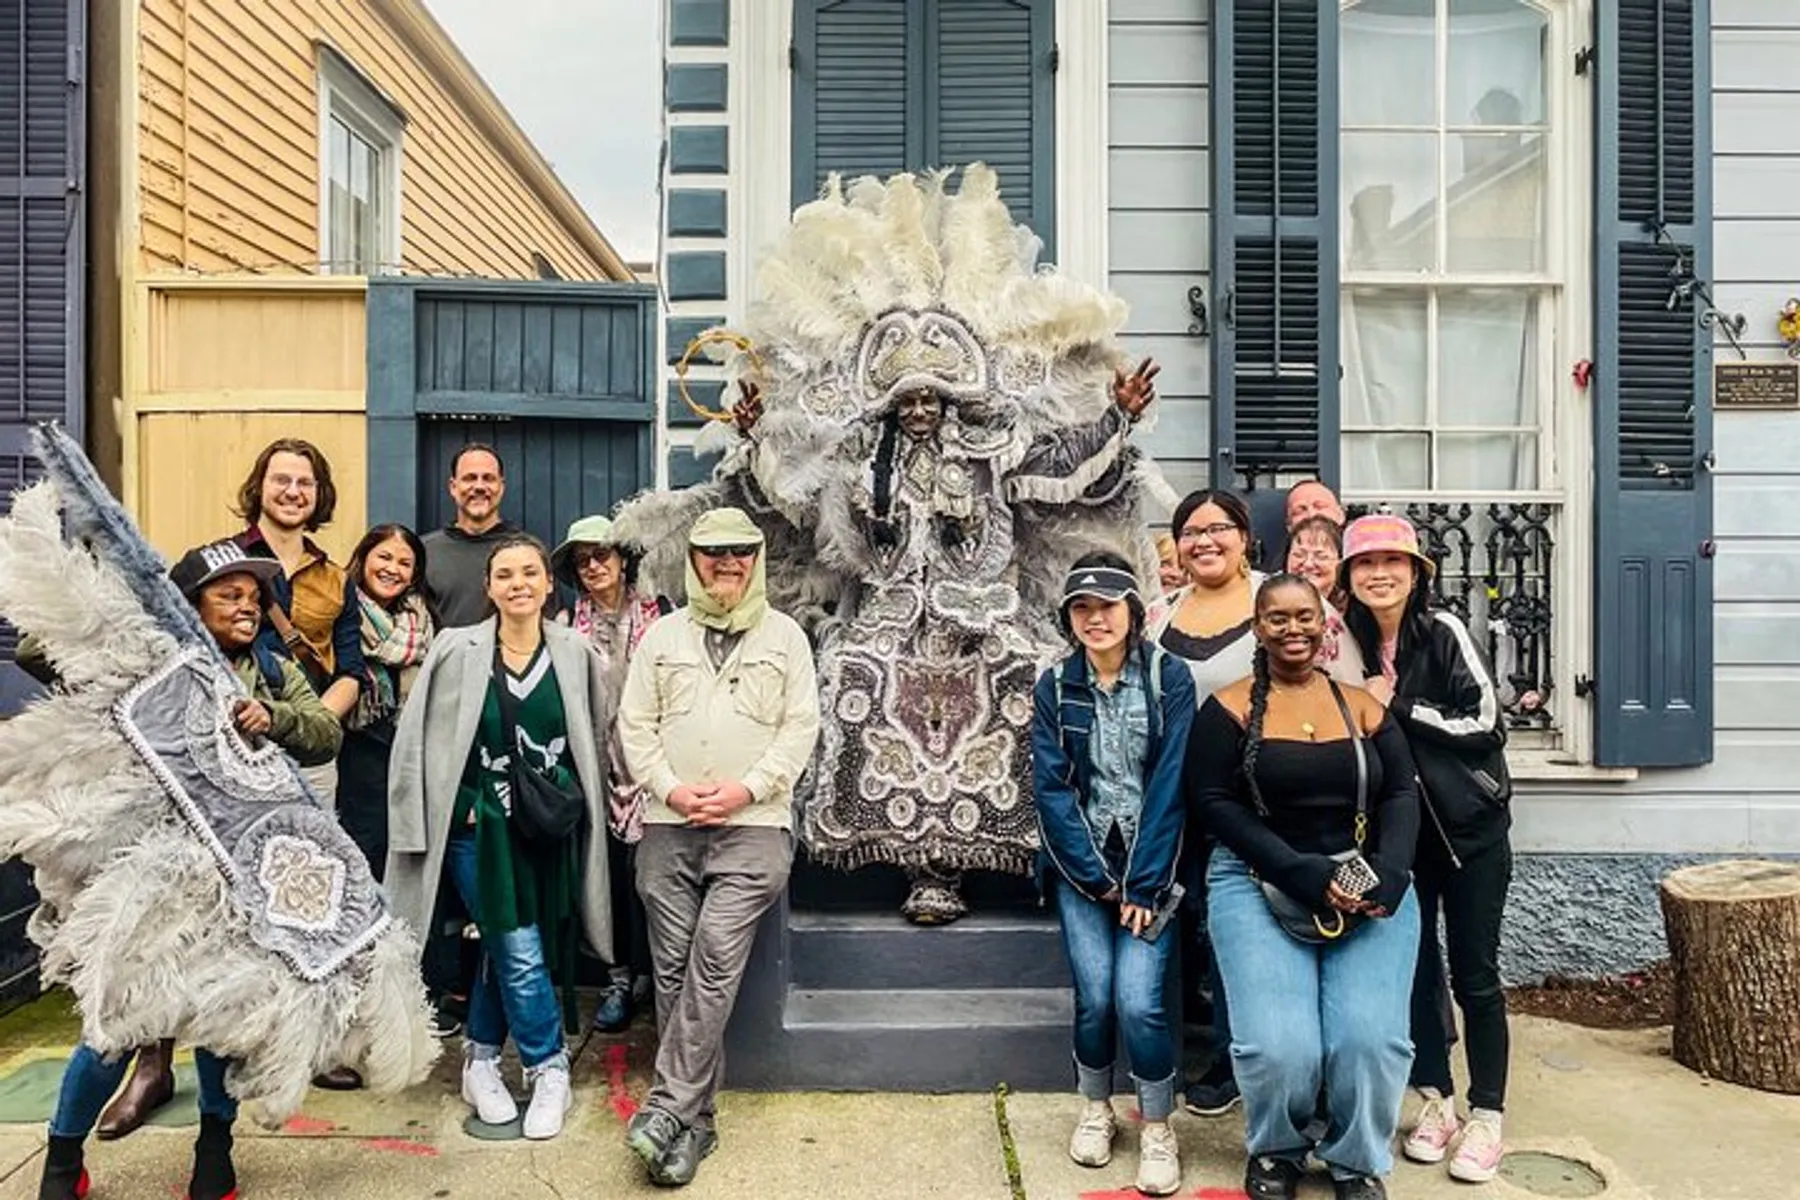 A group of people pose for a photo with a person dressed in an elaborate costume featuring feathers and beadwork, typical of Mardi Gras or a similar cultural celebration.